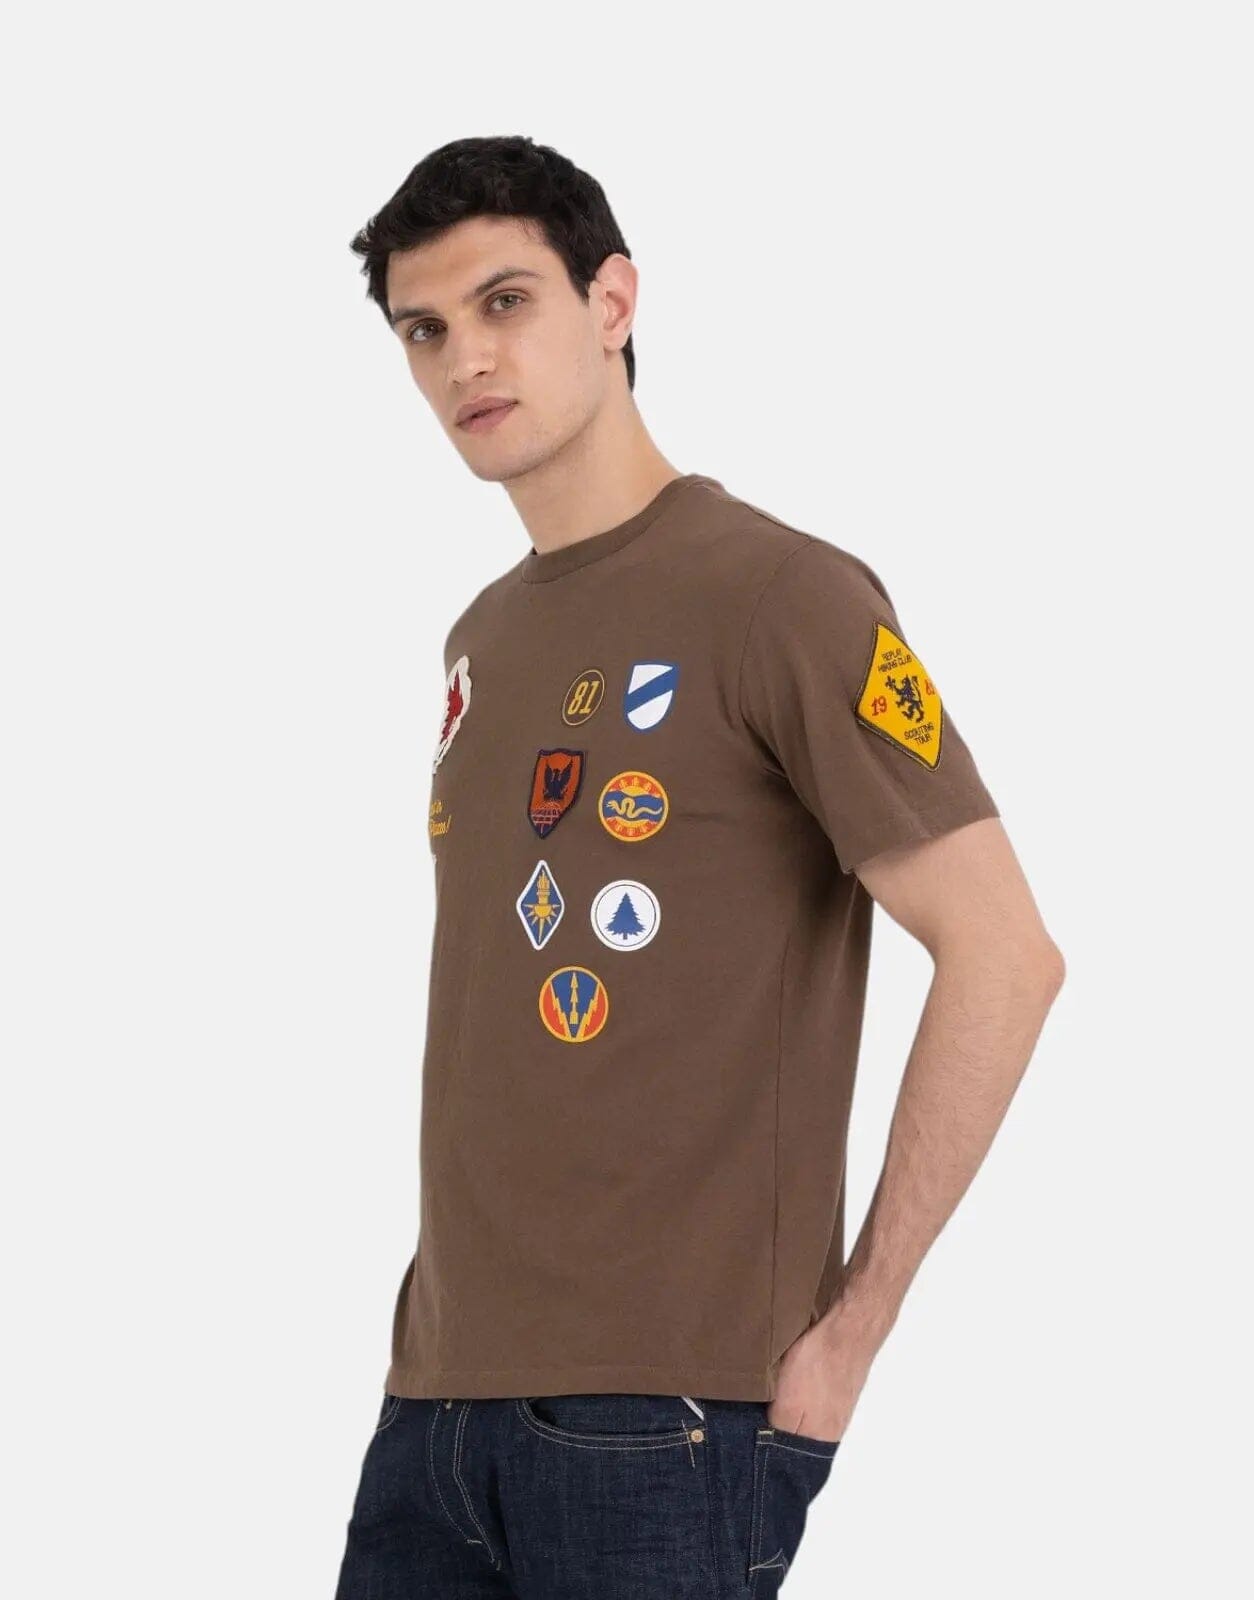 Replay Save The Forest Multi Badge T-Shirt Wood - Subwear